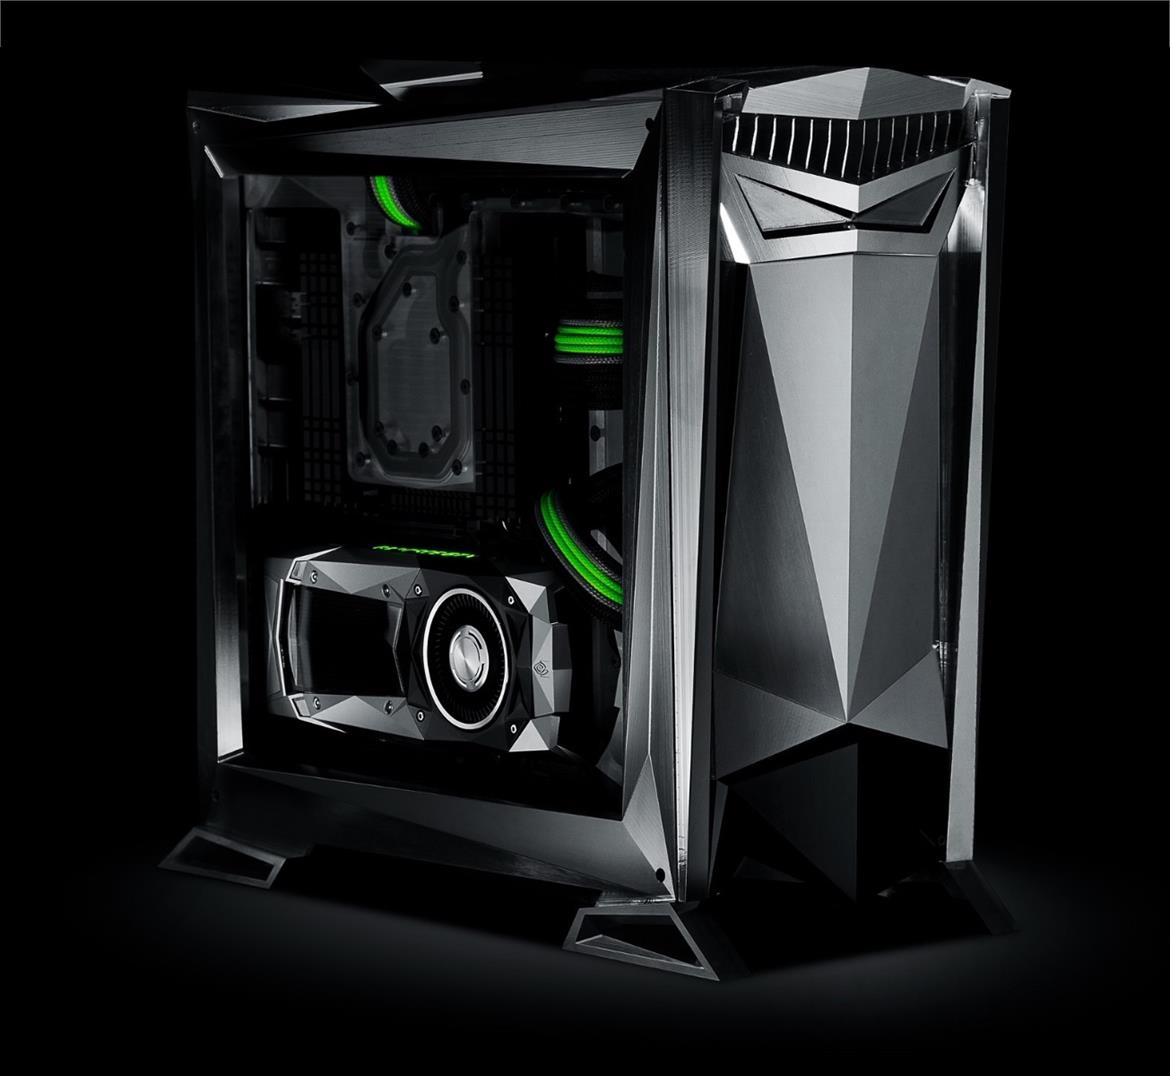 NVIDIA And Parvum Sponsor Jaw-Dropping Custom Ultimate GeForce Gaming Rig With Embedded Acrylic Water Cooling